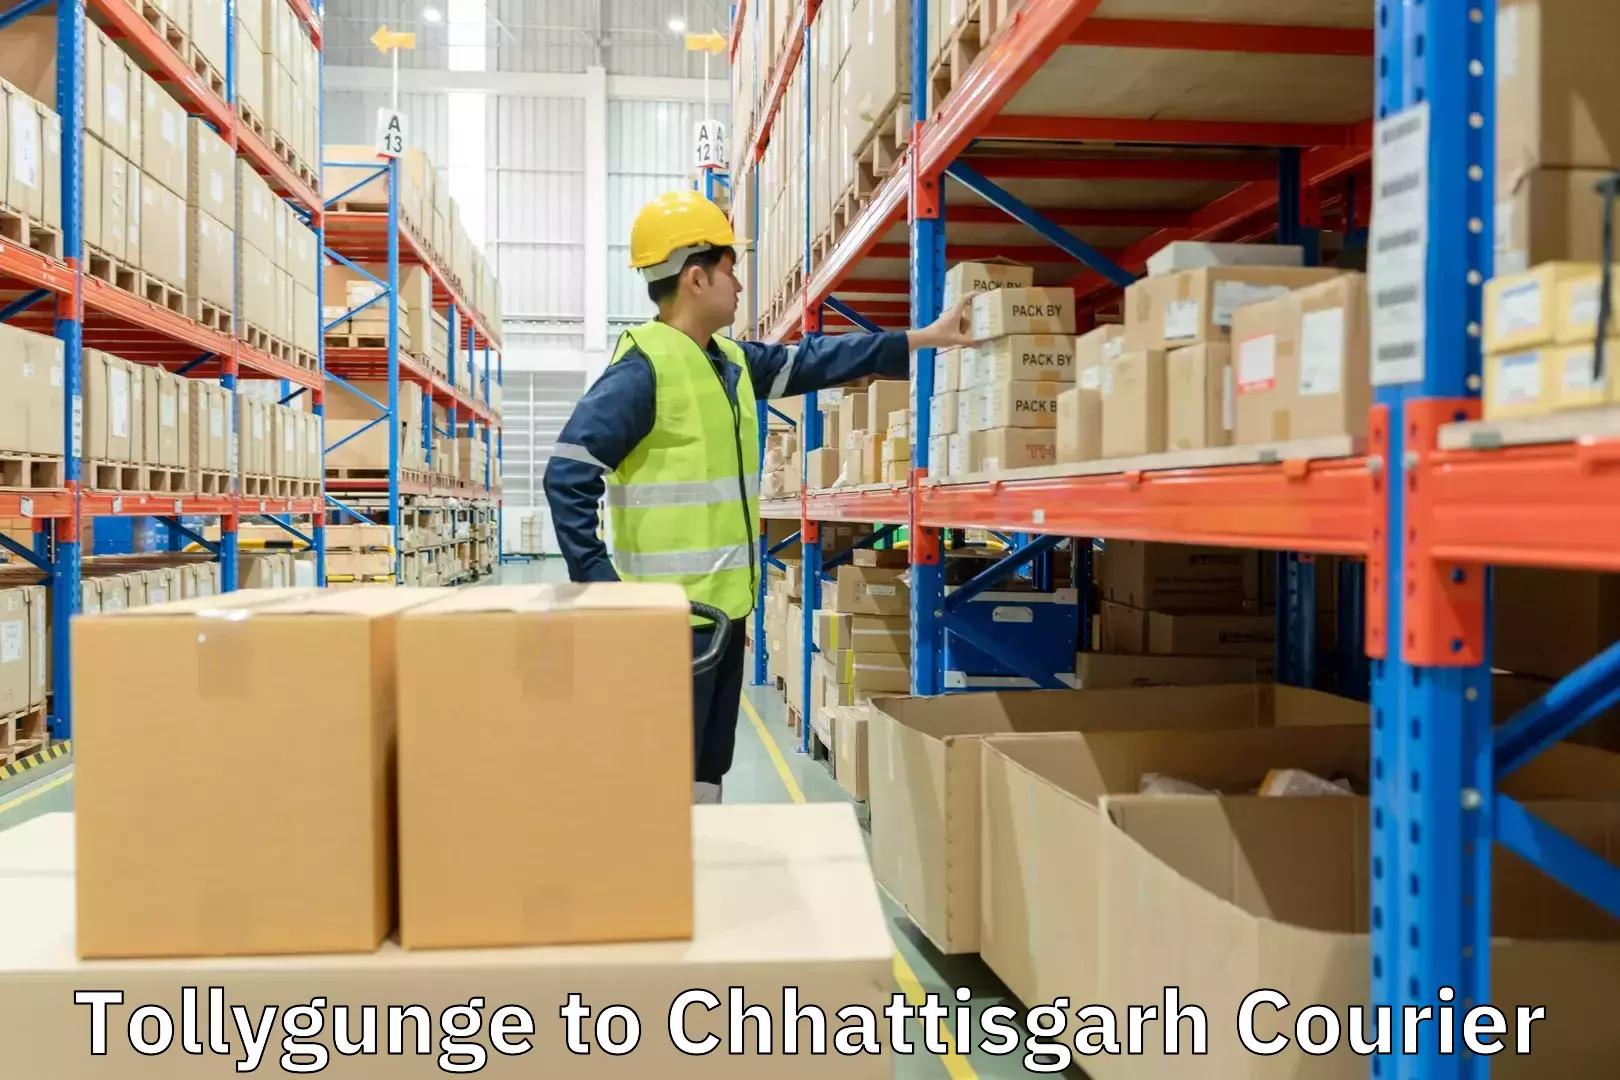 Parcel service for businesses Tollygunge to Chhattisgarh